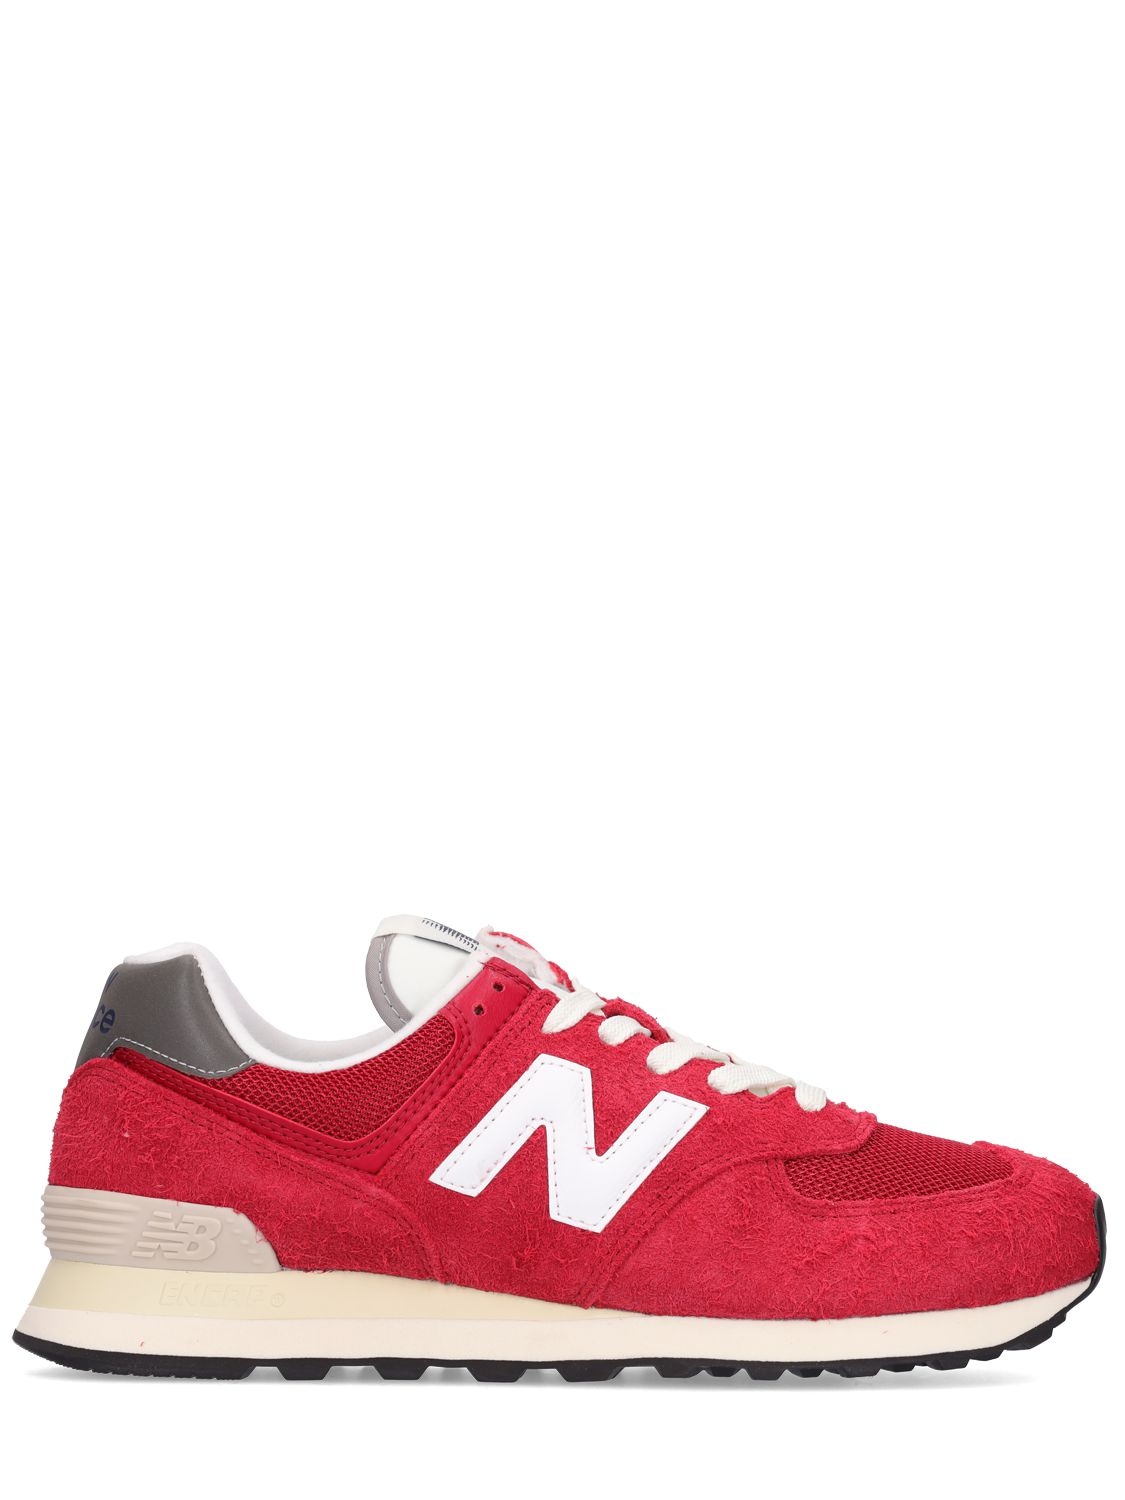 New Balance 574 Trainers In Red | ModeSens